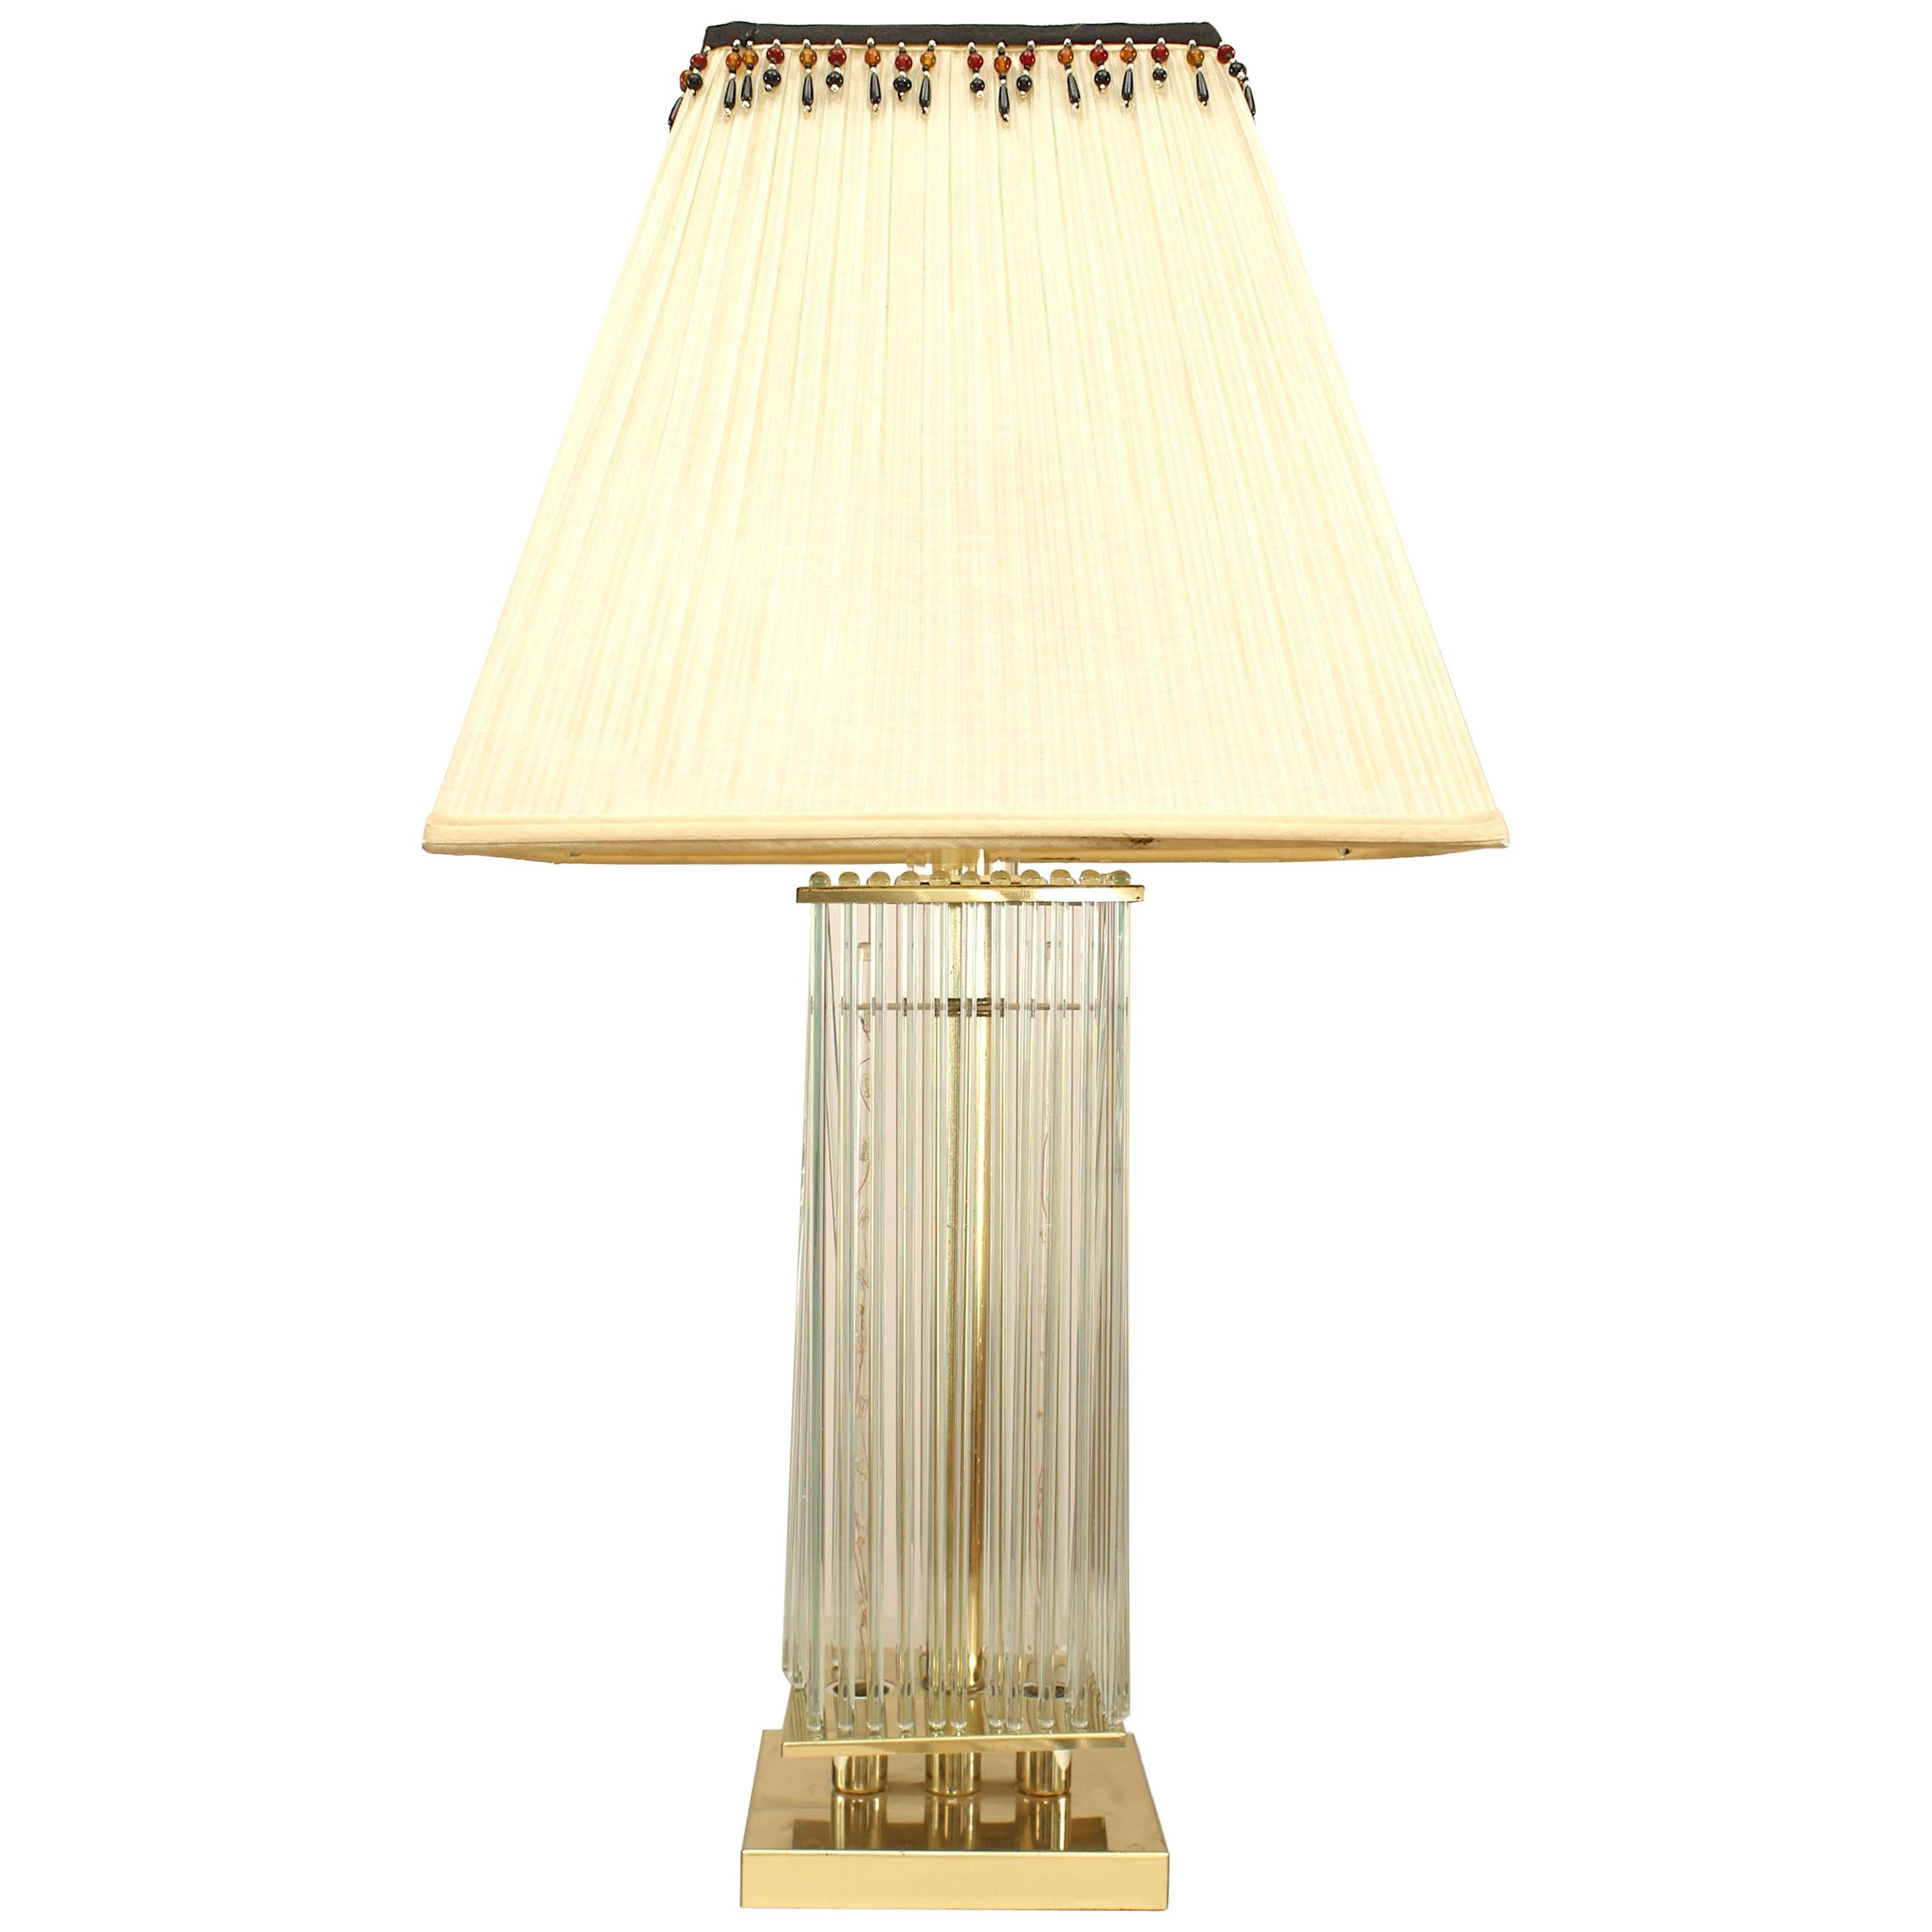 Contemporary Design Table Lamp For Sale